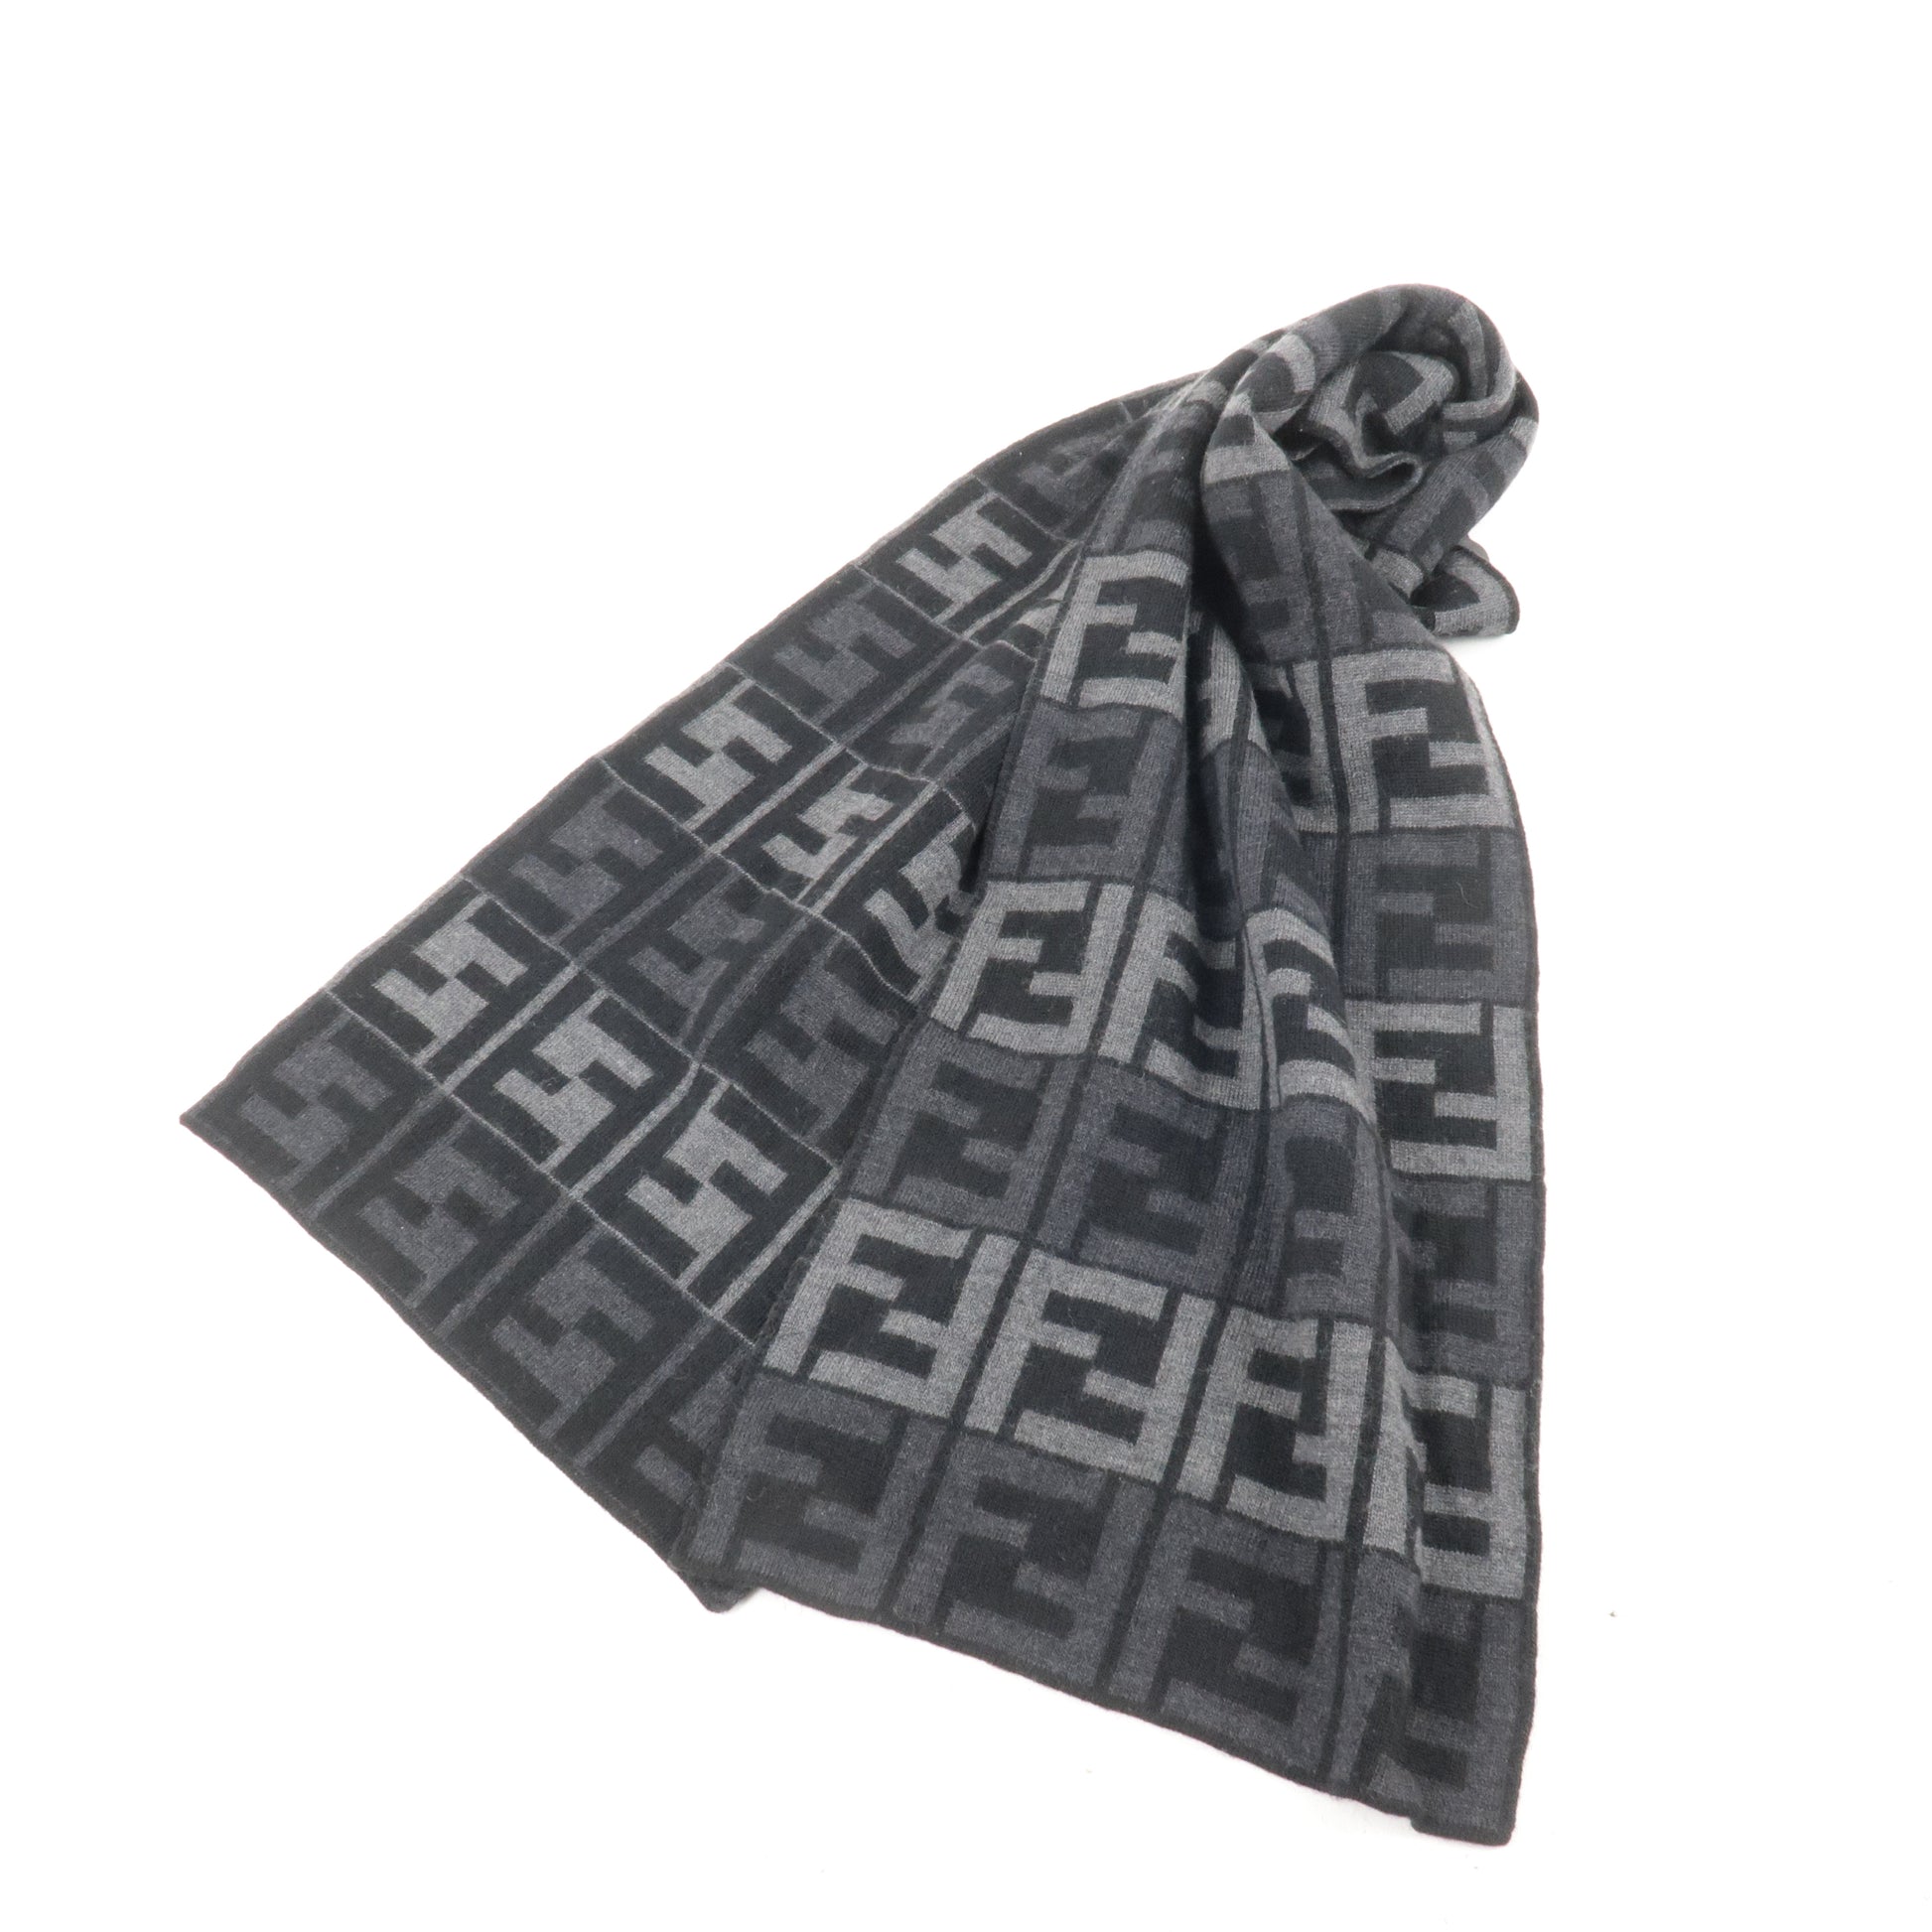 Luxury Scarves - Are They Worth It? Feat. CHANEL, HERMES, Louis Vuitton,  FENDI